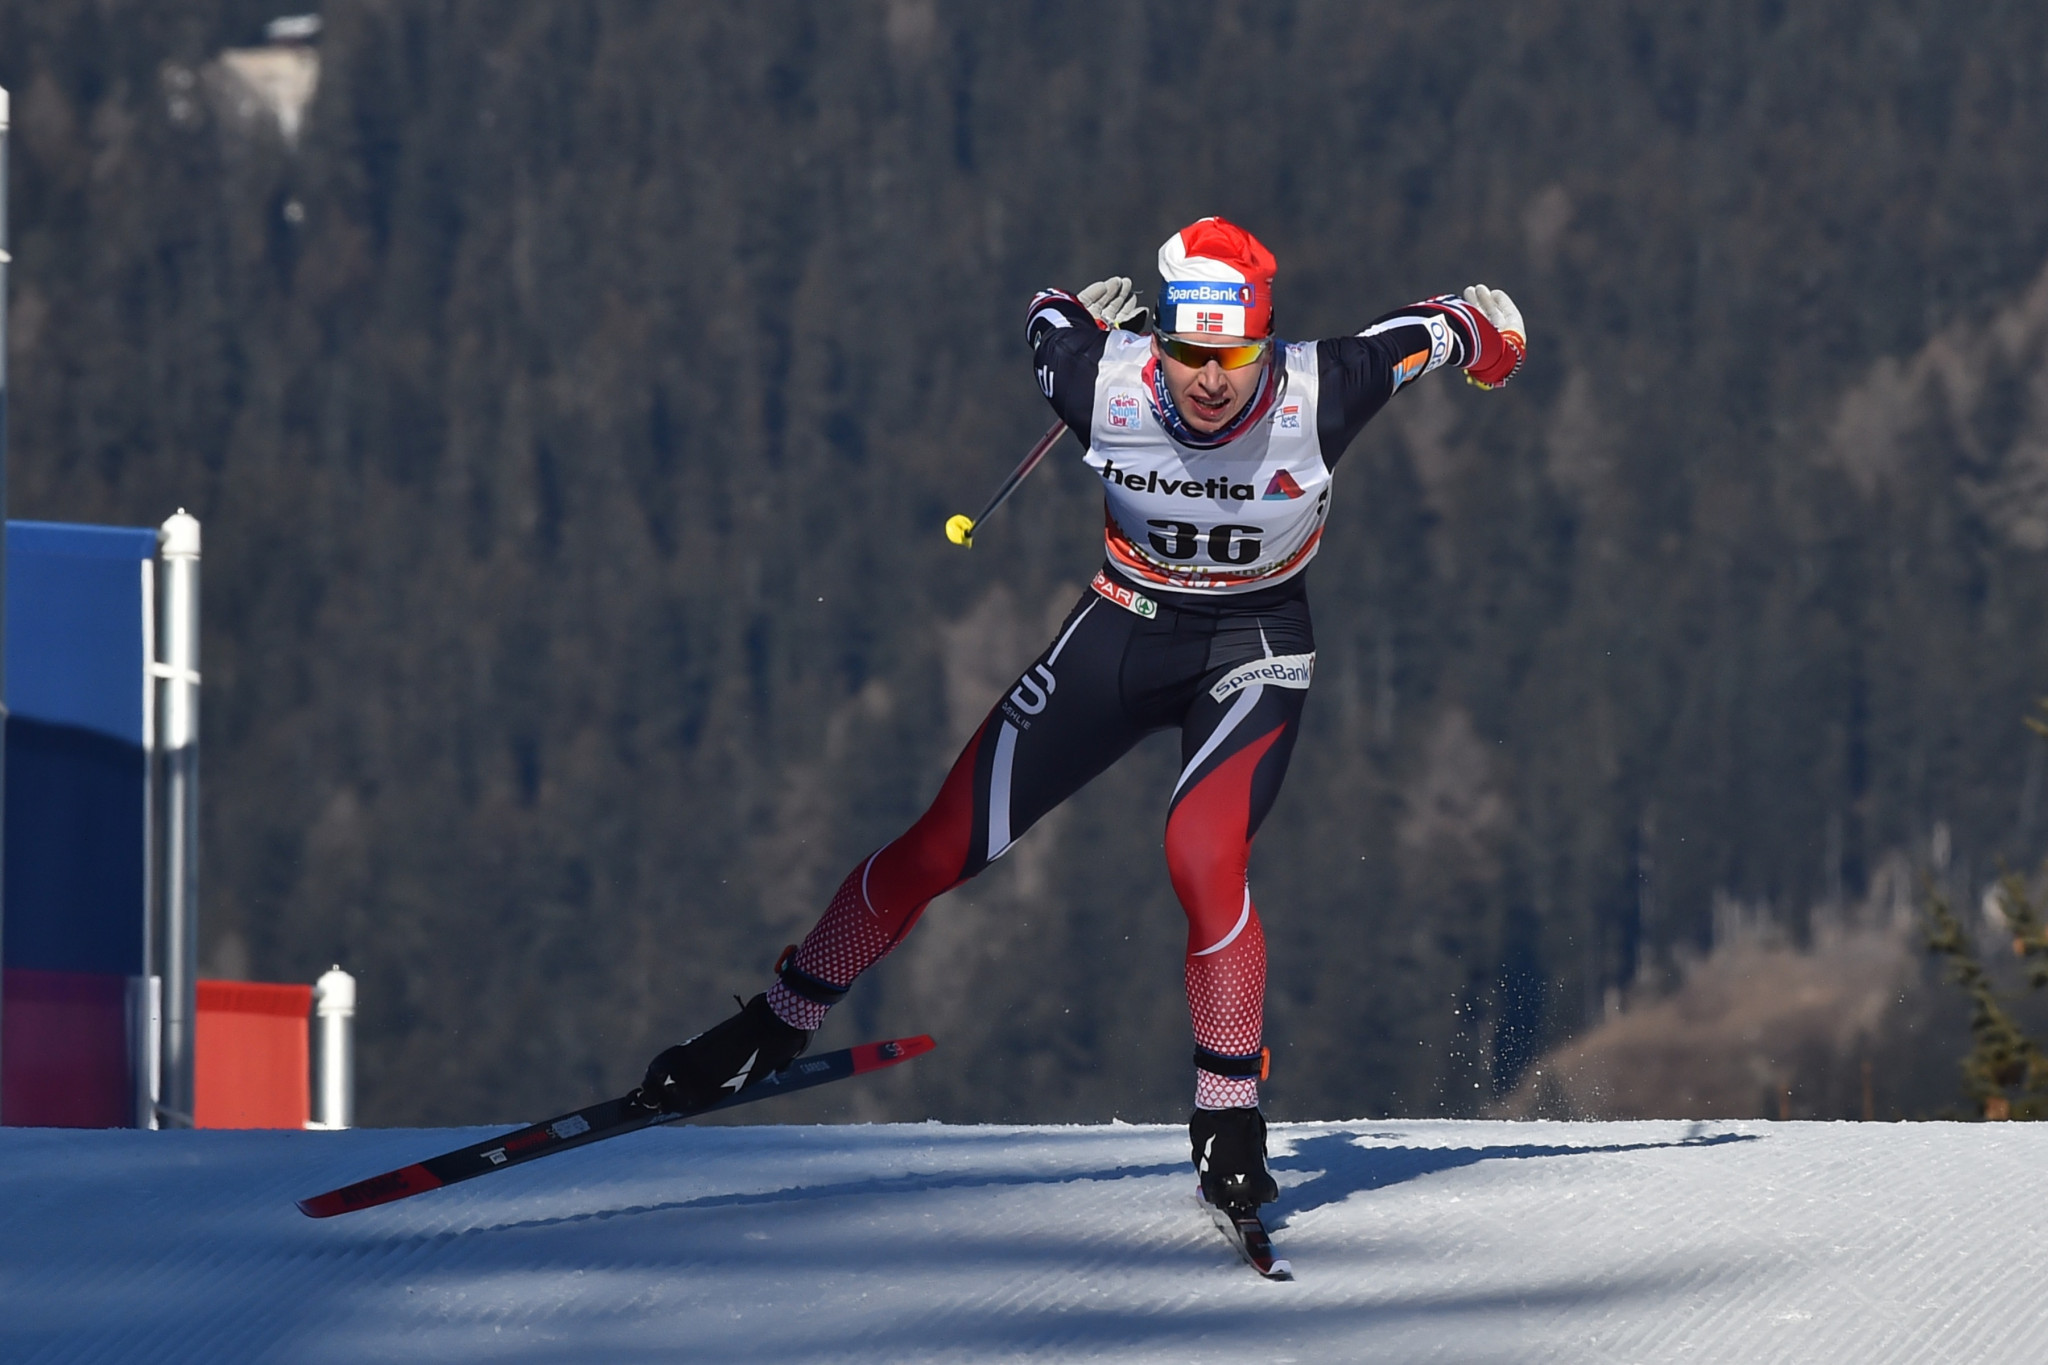 Simen Hegstad Krueger won his first-ever FIS Cross-Country World Cup event in Toblach ©Getty Images